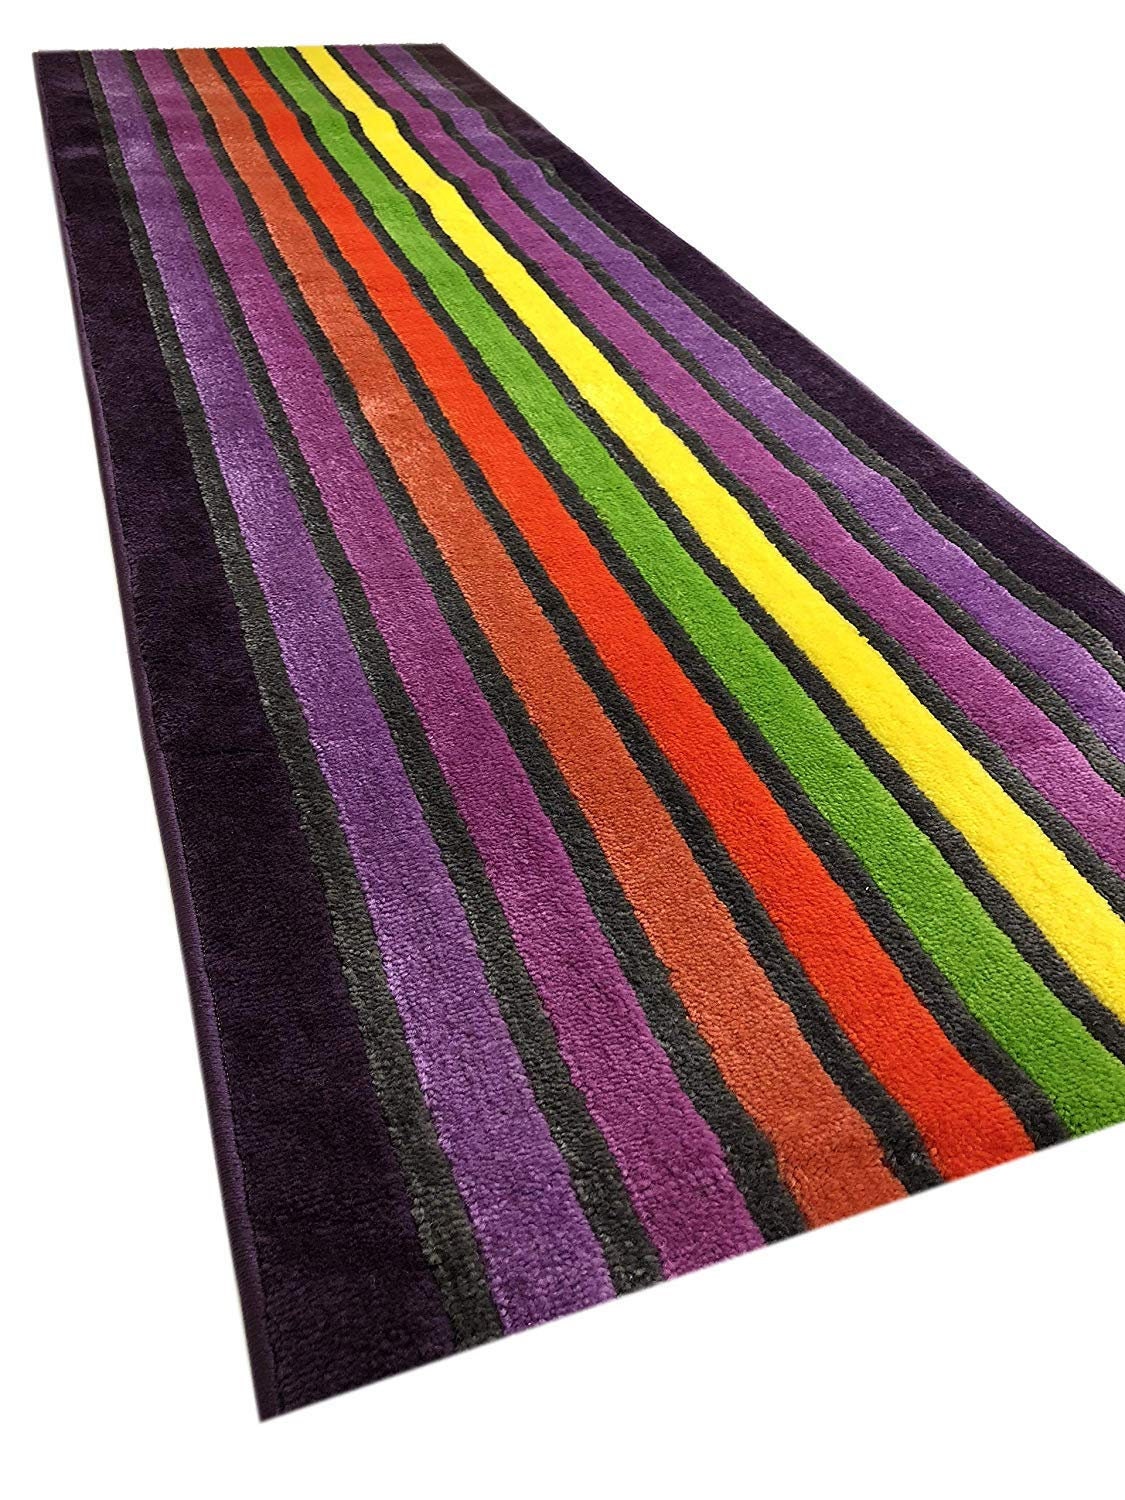 Custom Size Runner Rug Stripes Abstract Rainbow Multi Color Skid Resistant Runner Rug Cut To Size Non Slip Runner Rug Customize By Feet